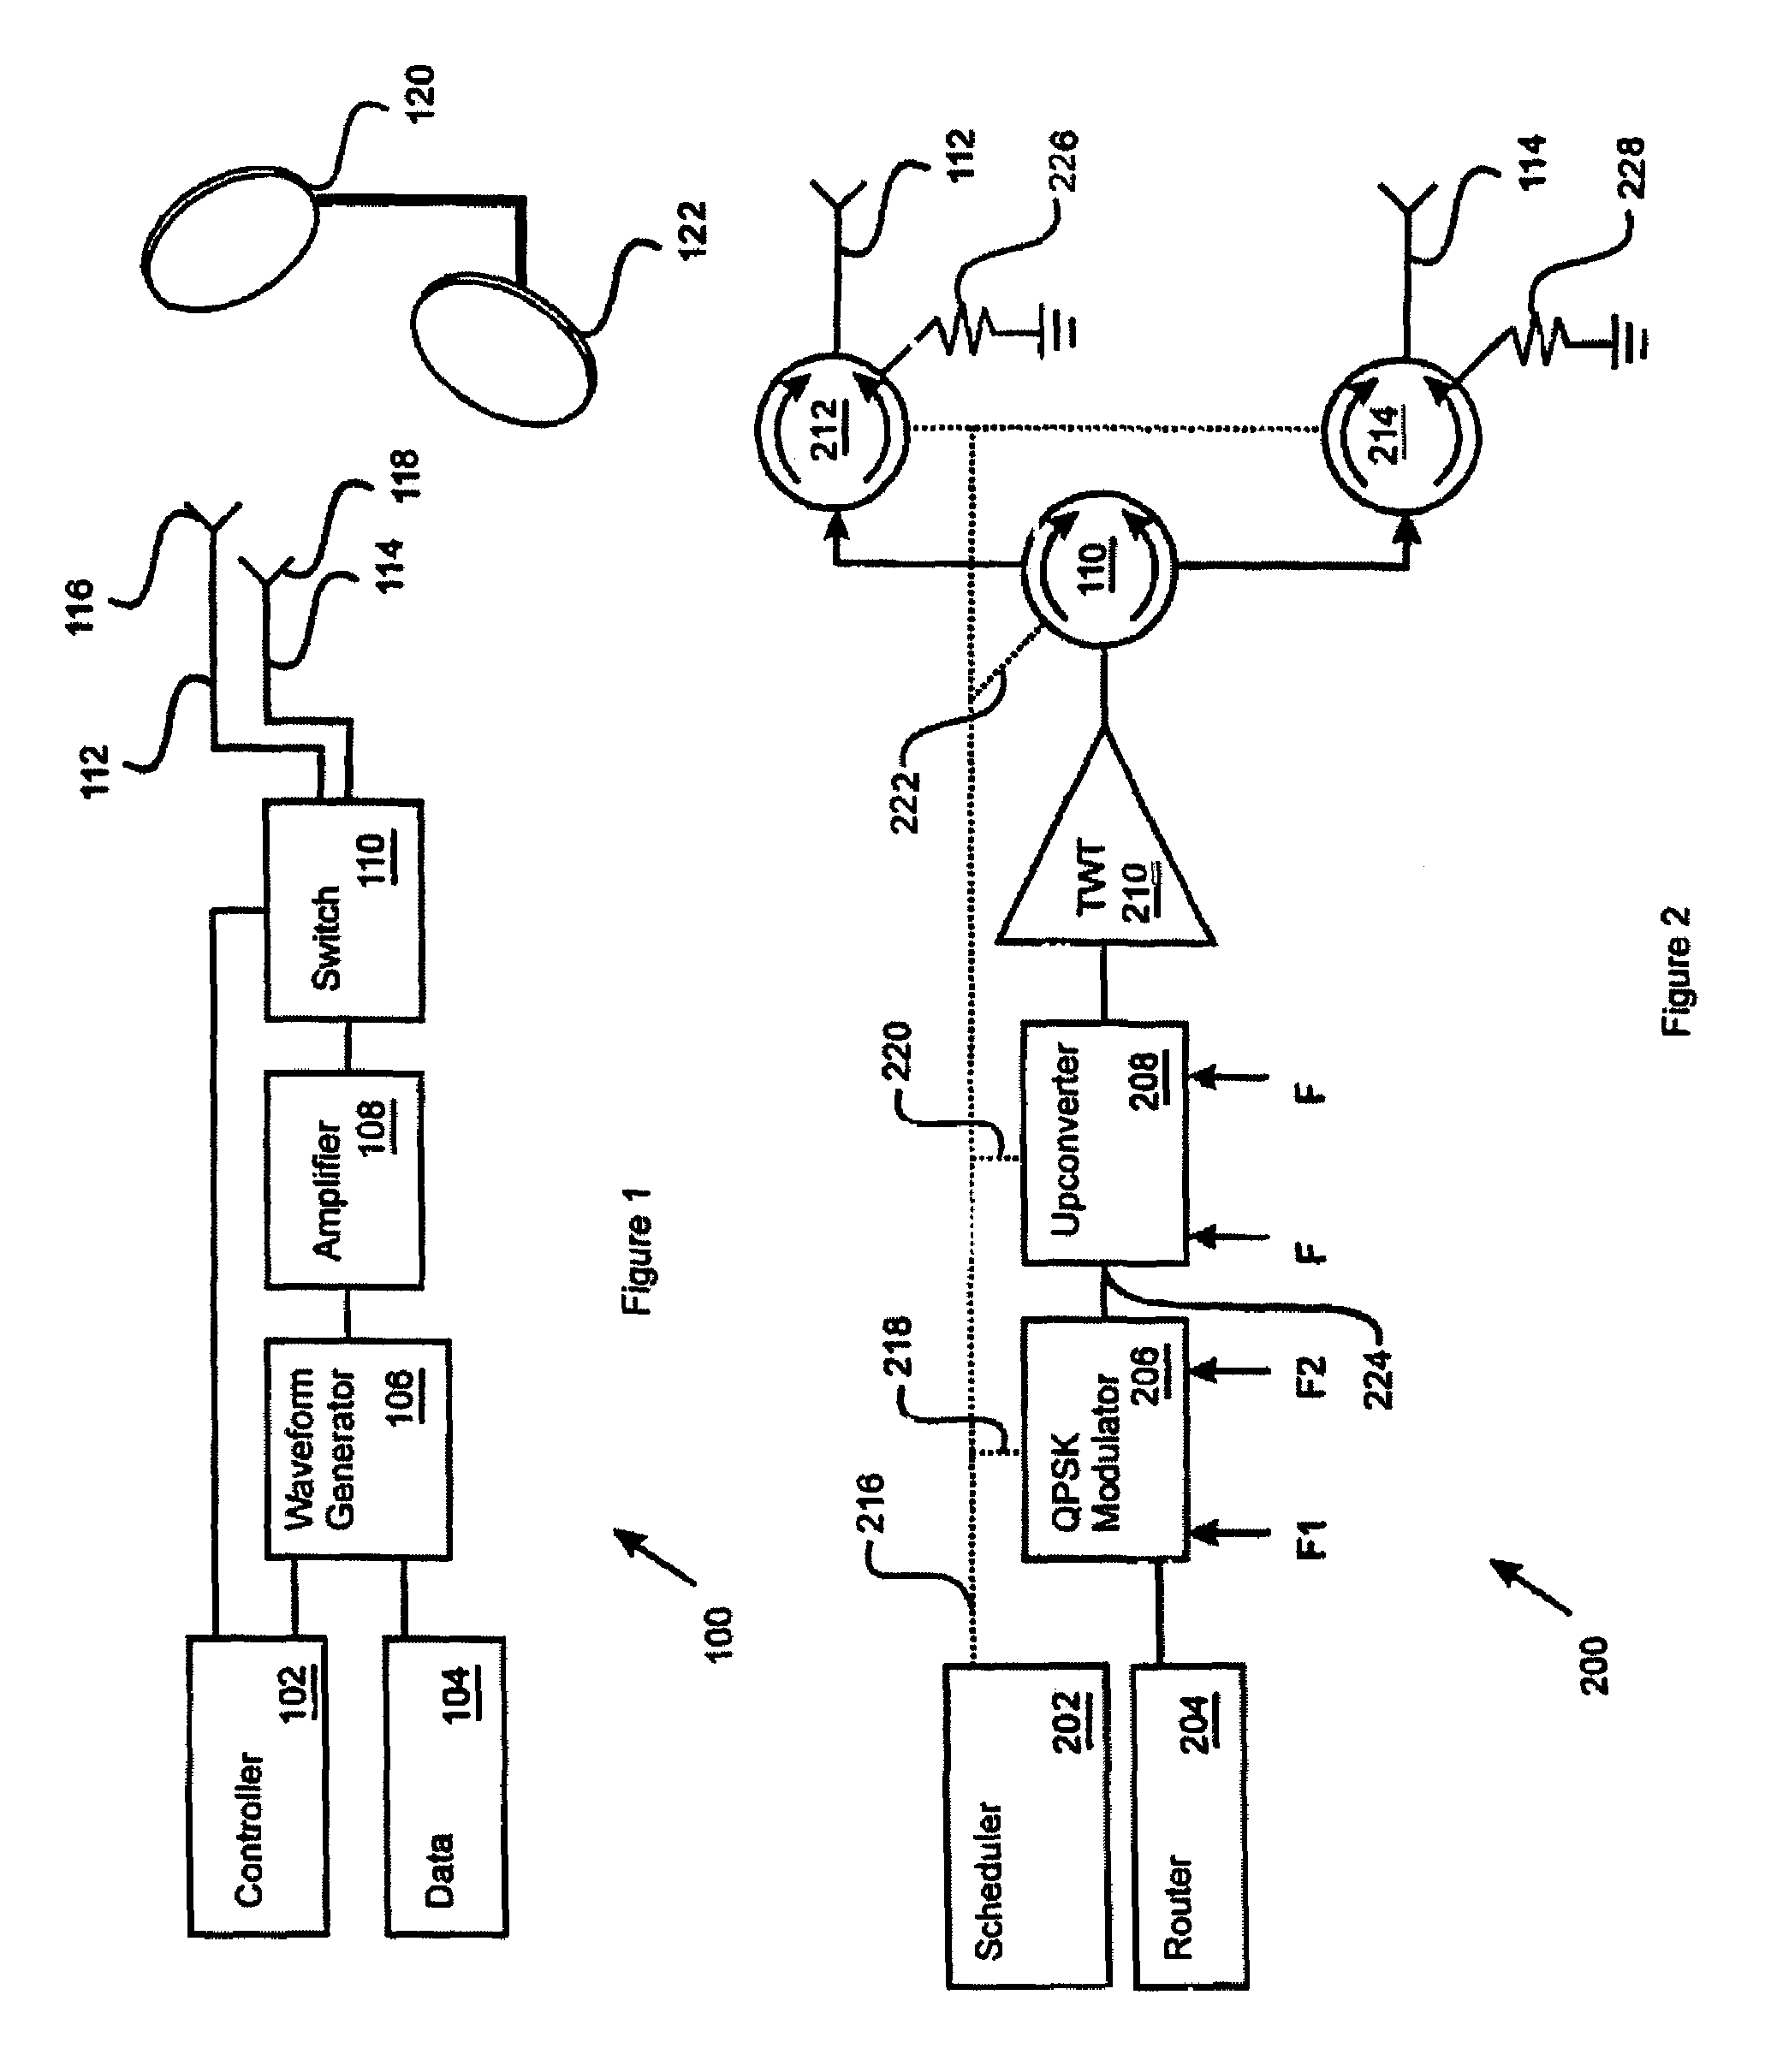 Beam hopping self addressed packet switched communication system with power gating